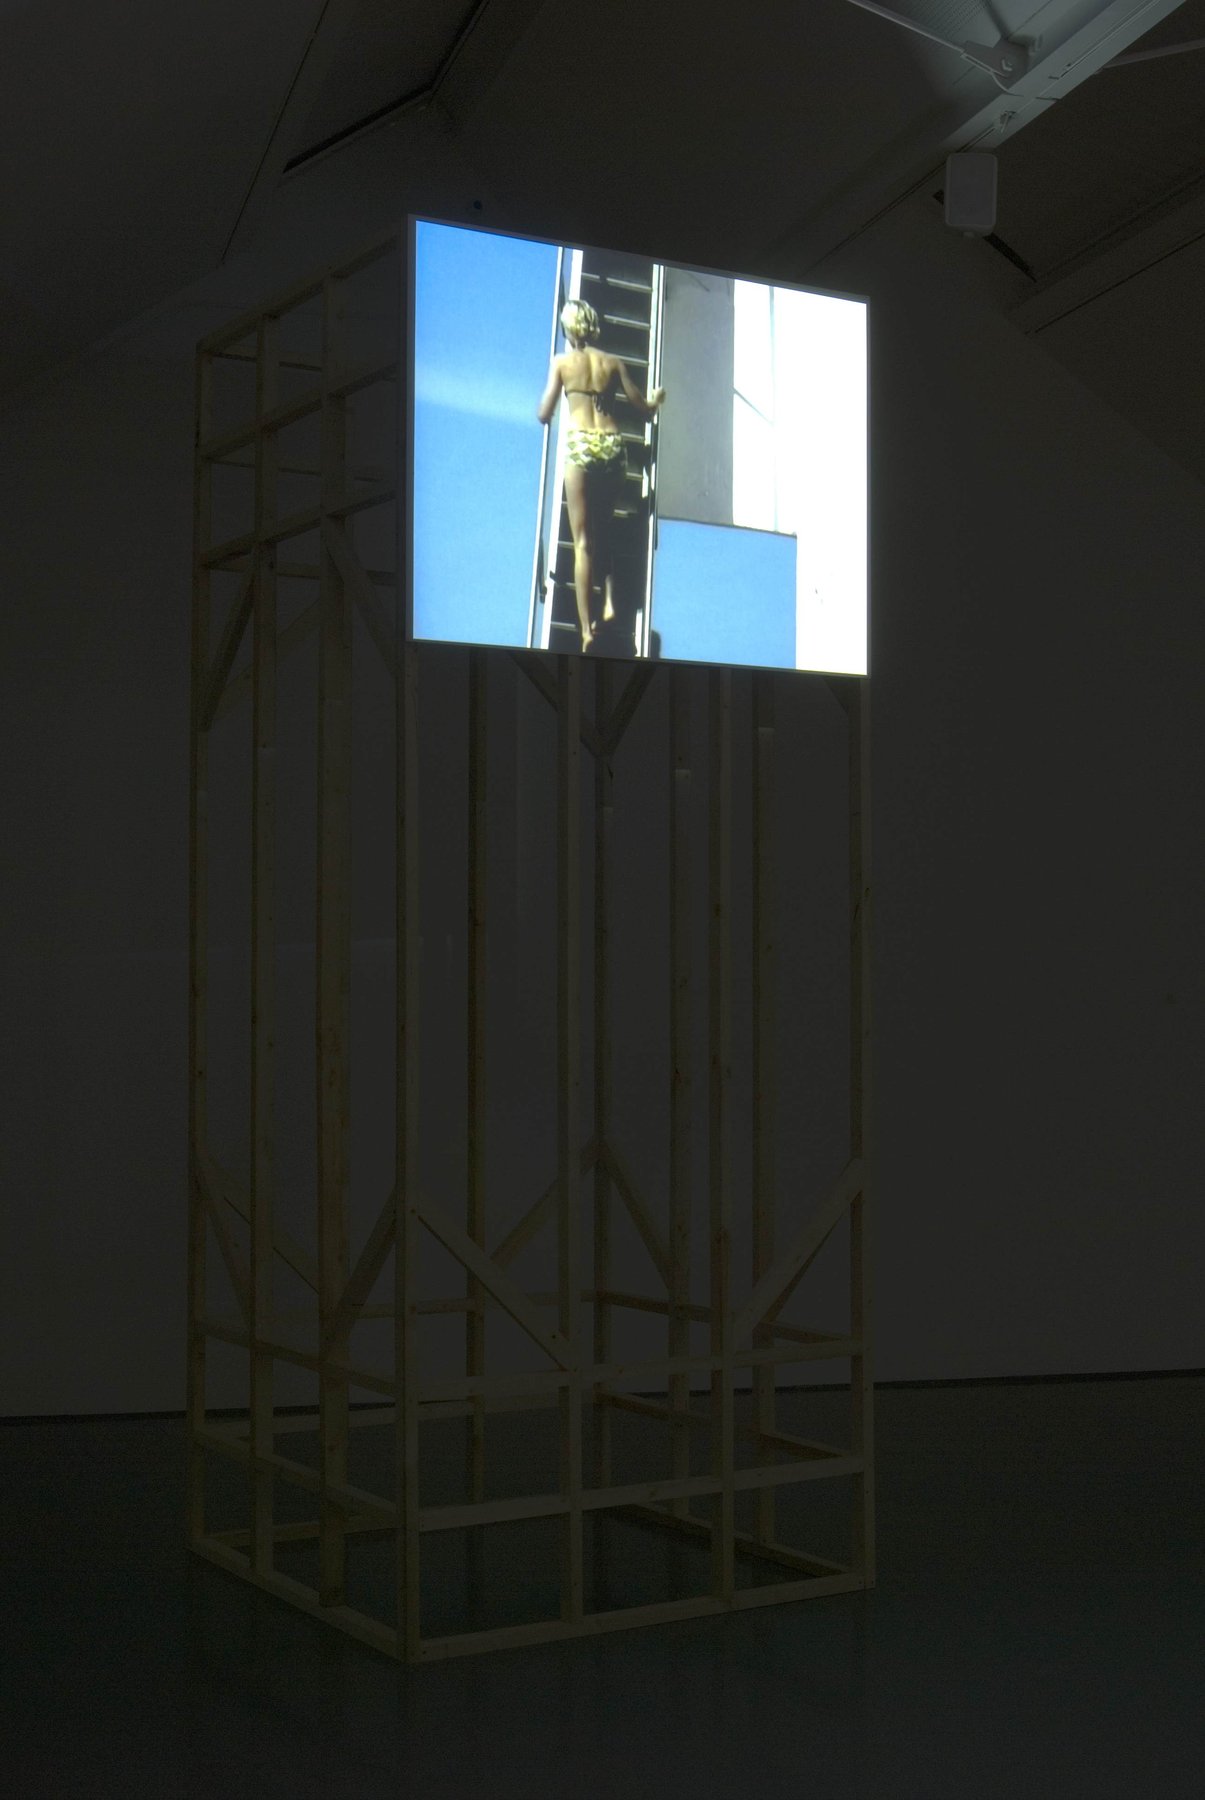 Where she is at, 2001, DV, 07’35'', loop, installation view, Modern Art Oxford, 2010